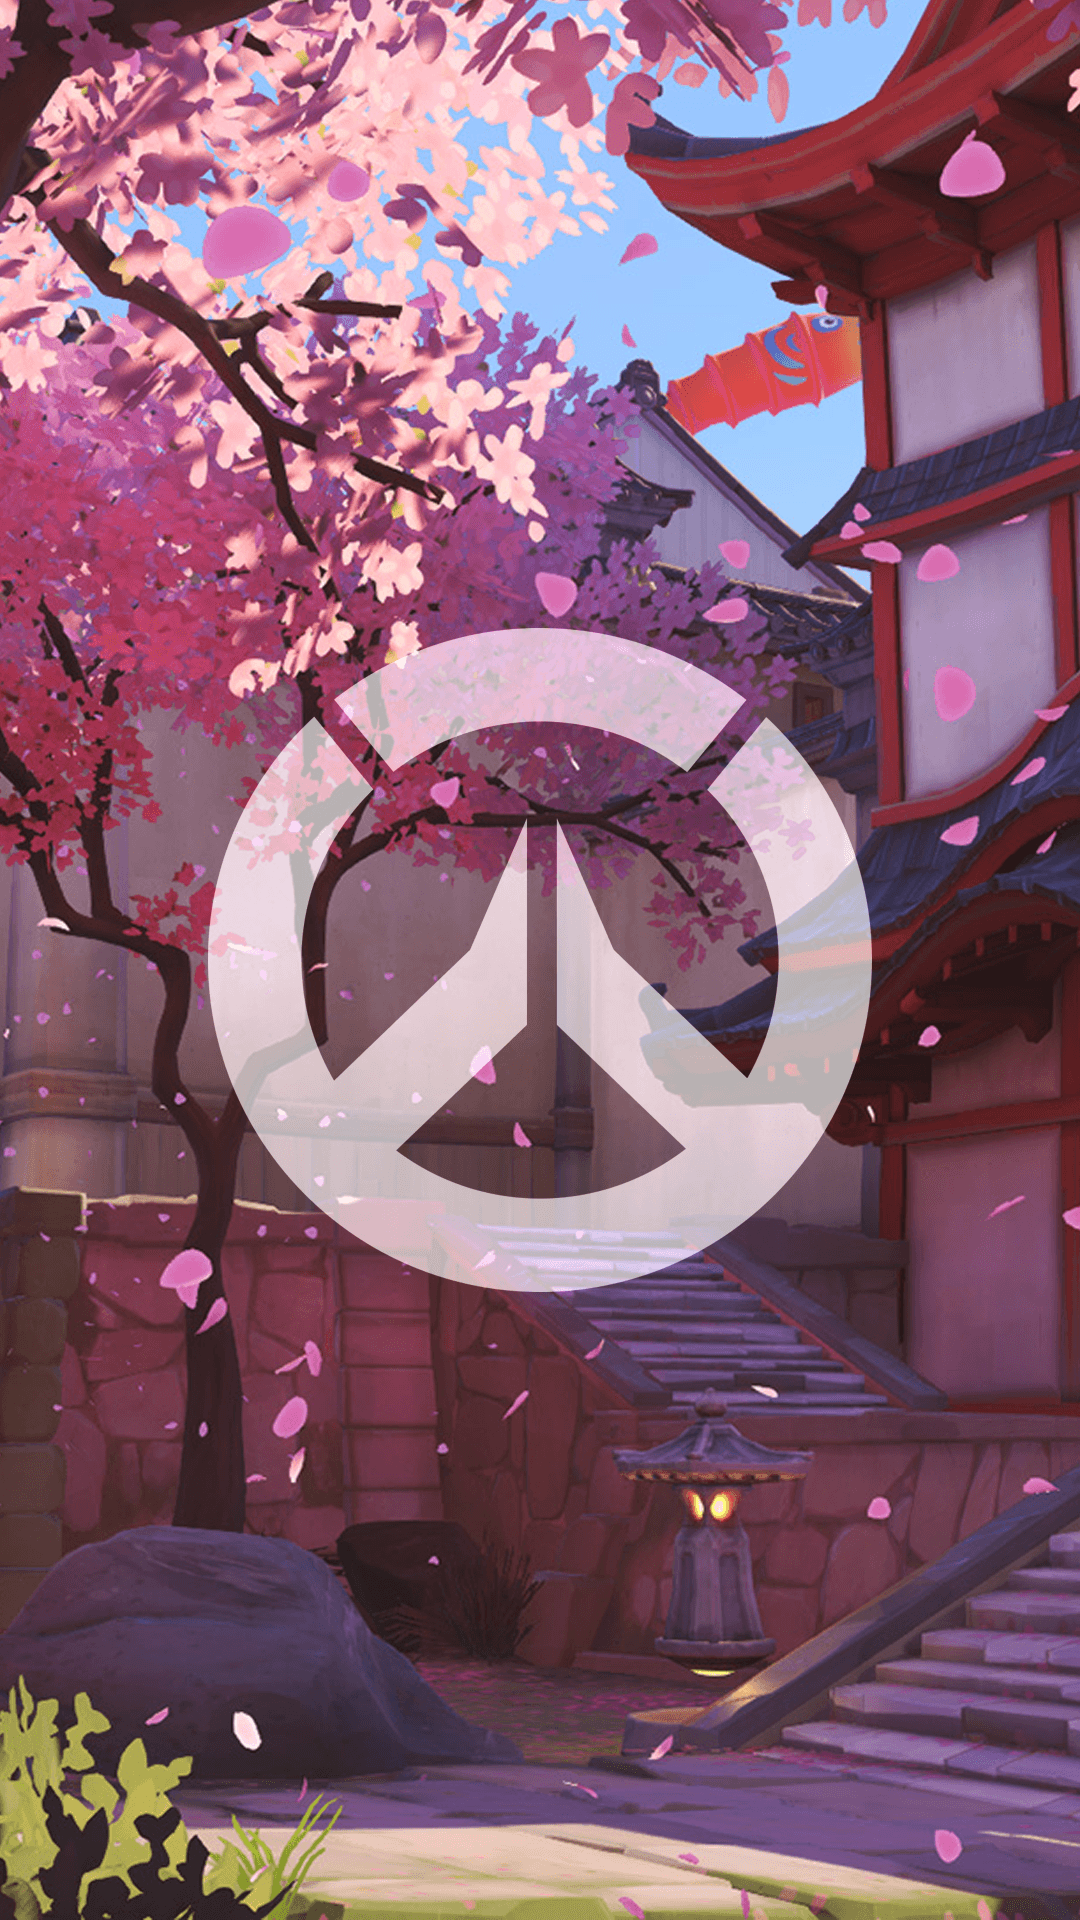 I made two wallpaper for my phone maybe you will like it  rOverwatch